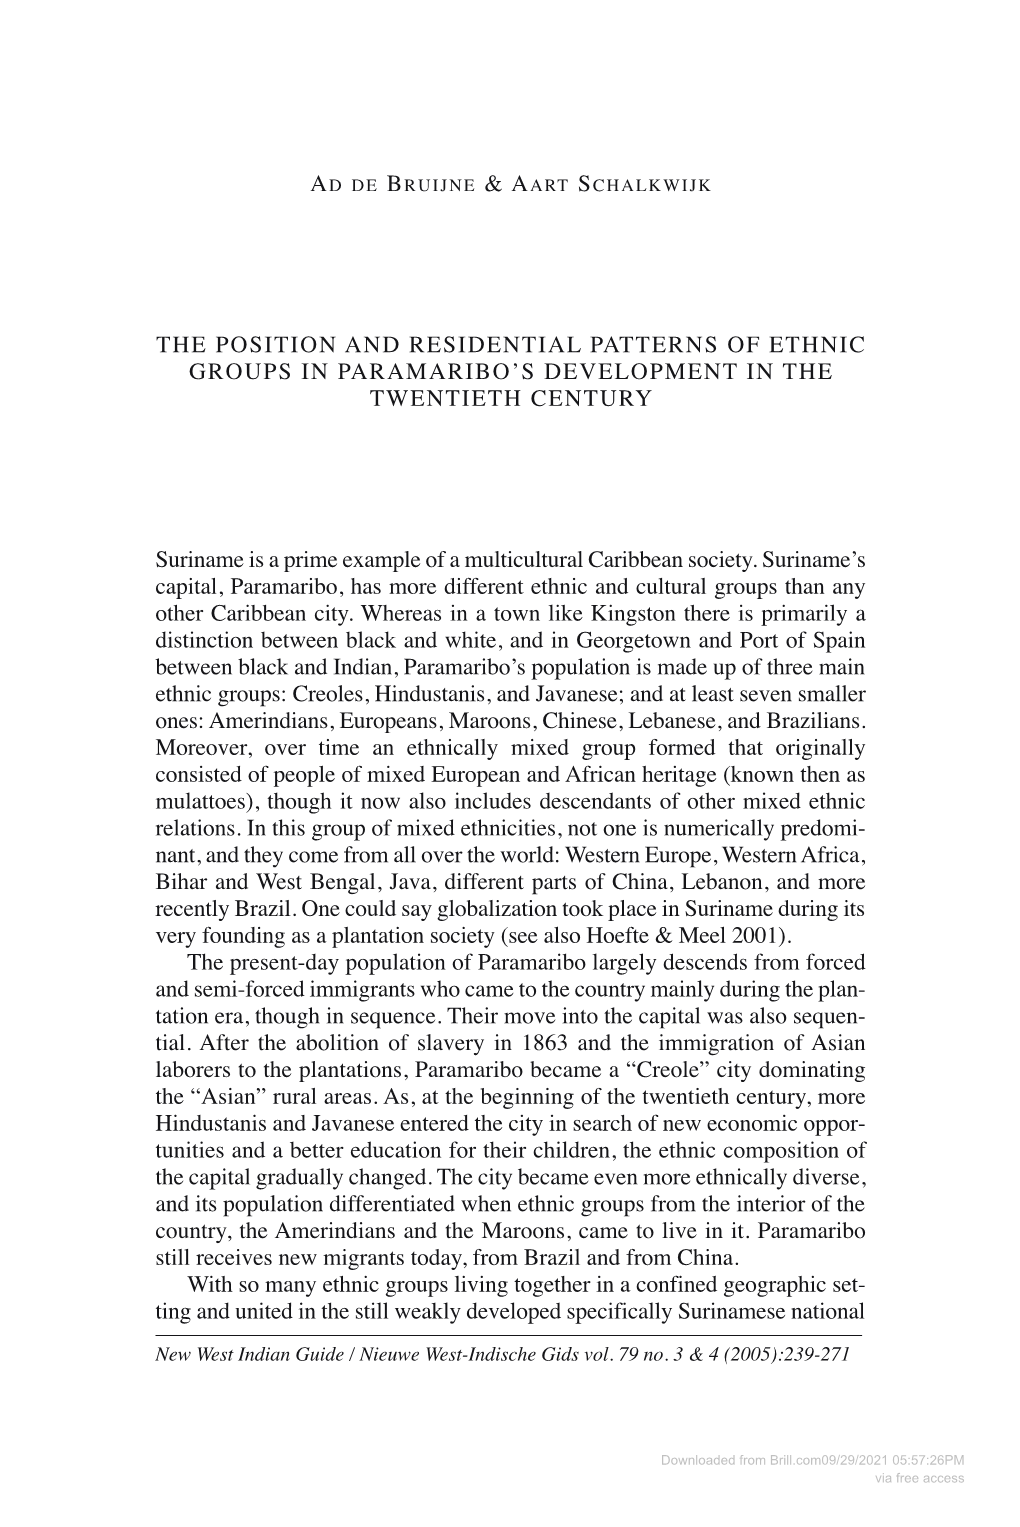 The Position and Residential Patterns of Ethnic Groups in Paramariboʼs Development in the Twentieth Century